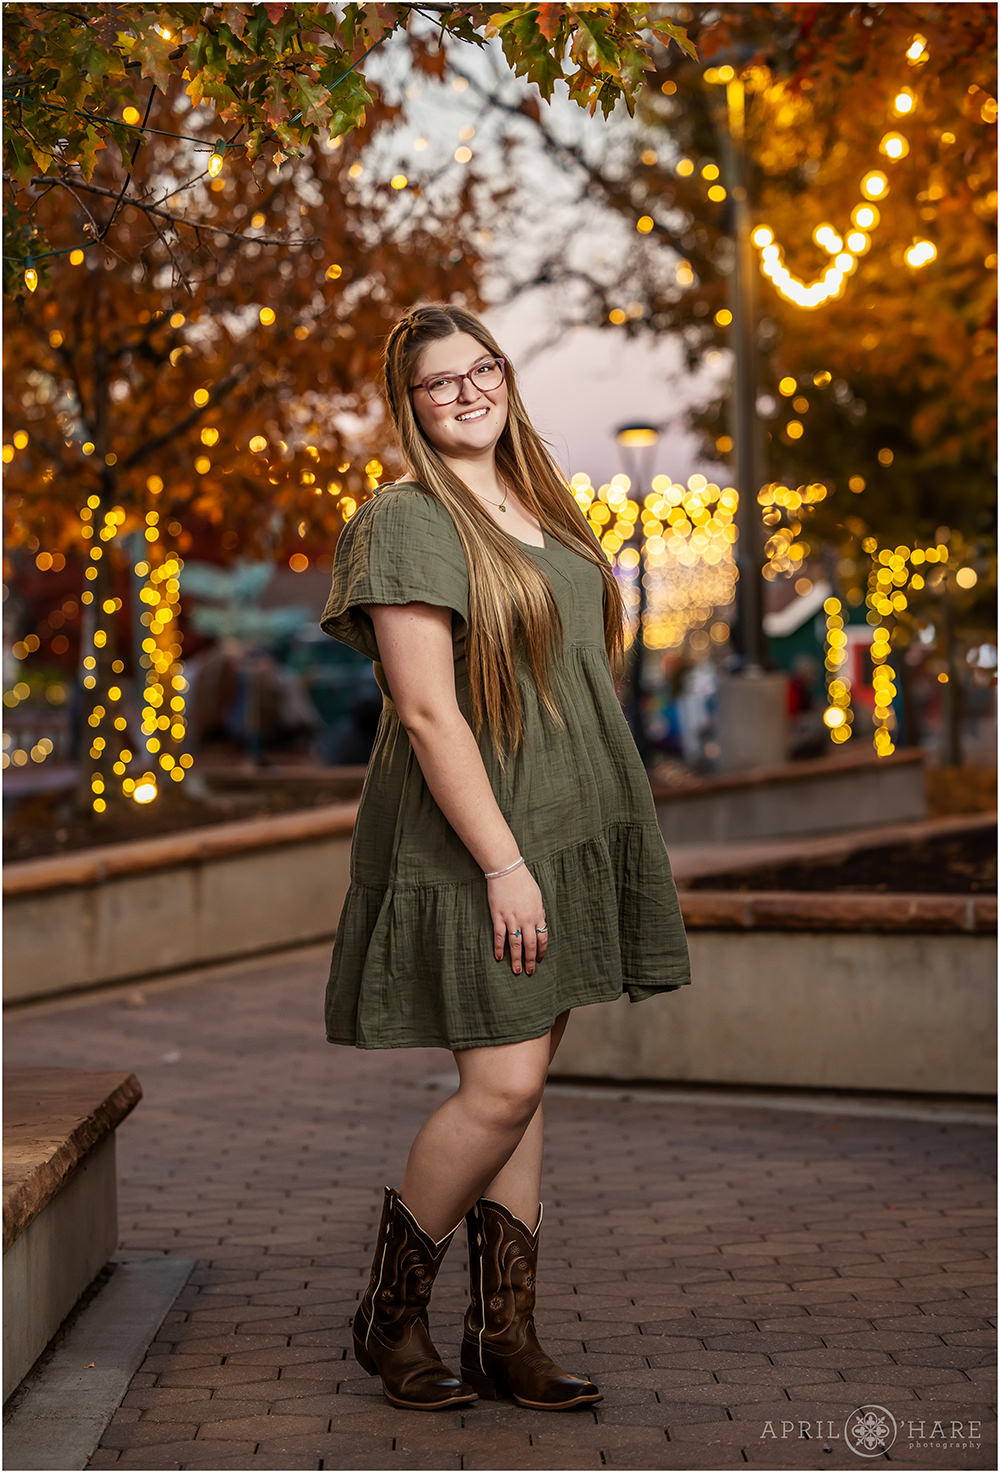 Fort Collins Senior Photographer photographs a senior girl wearing a cute green dress with cowgirl boots with the string light and fall color backdrop in Old Town Fort Collins, Colorado